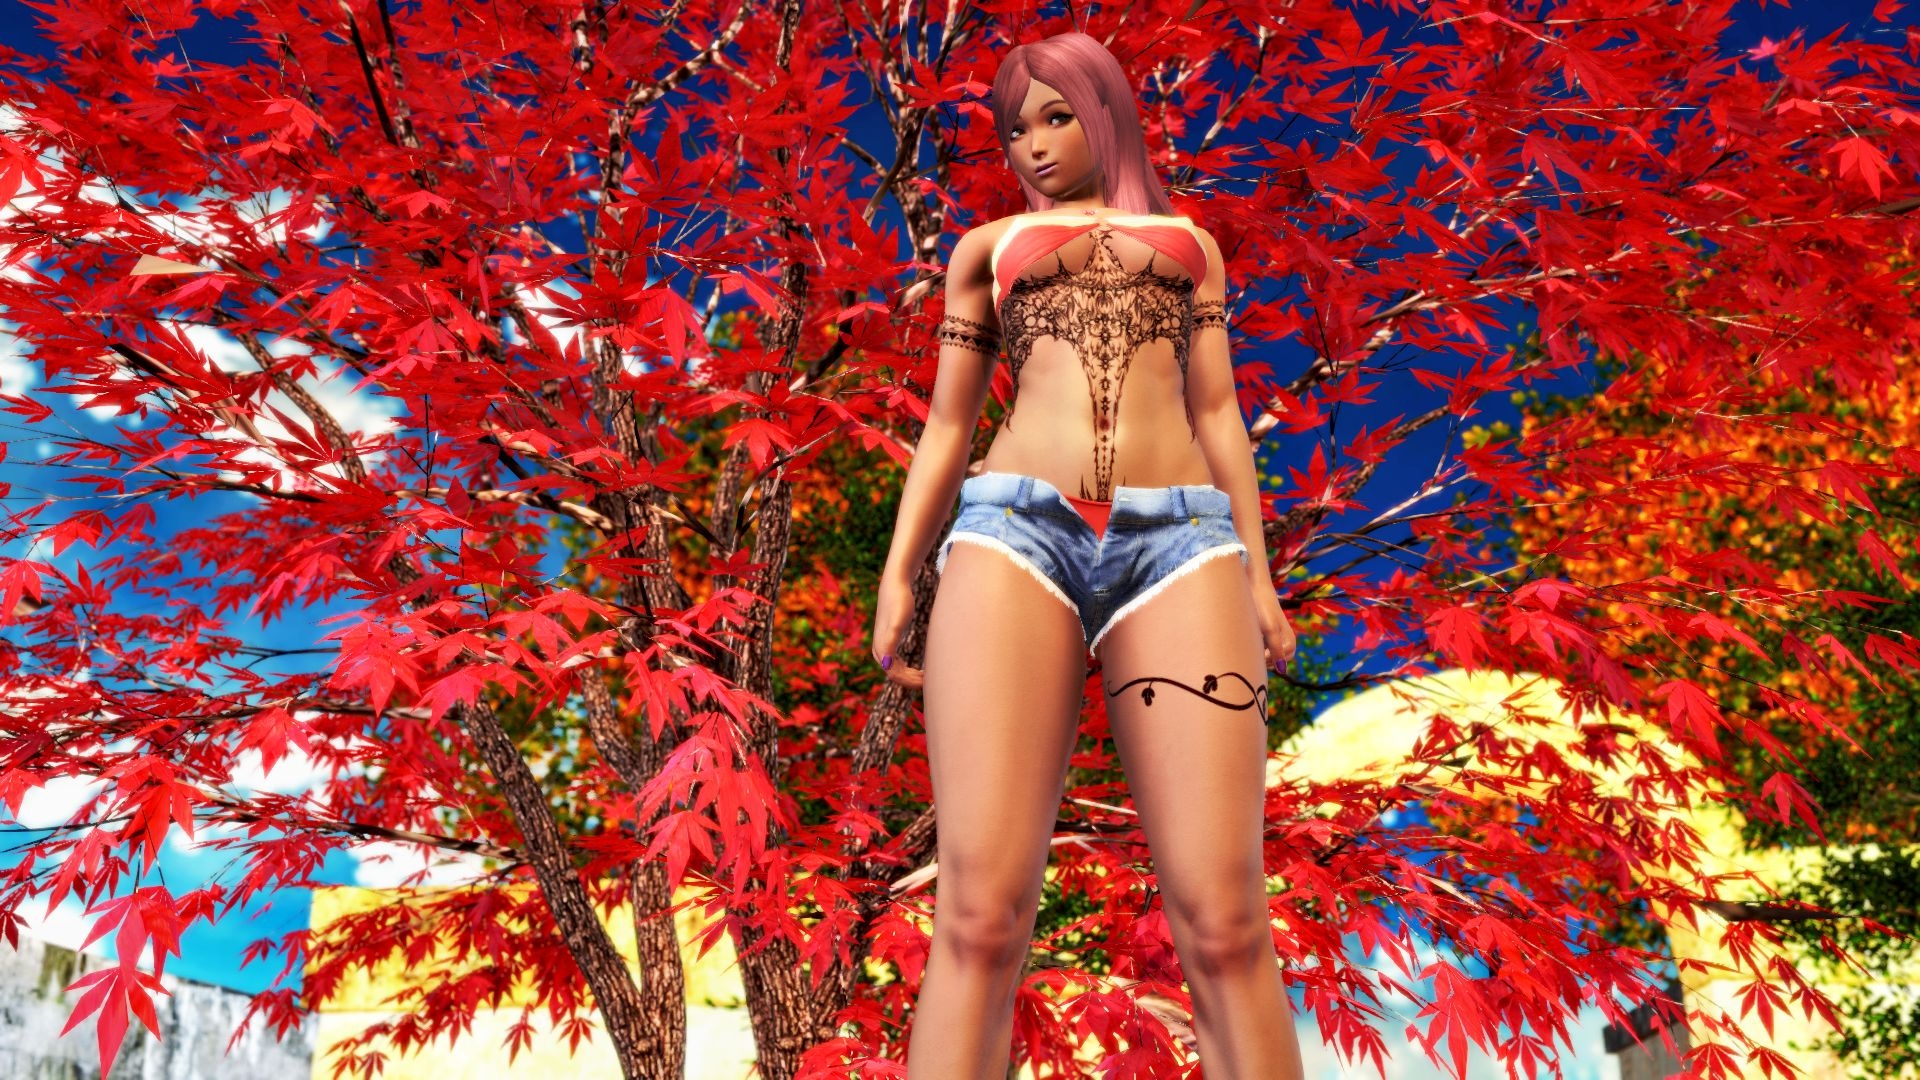 Tiffany At The Park Honey Select Stripper Endowed Adult Games Nsfw Games 3d Porn Porn Game Thicc Thick Thighs Tattoo Tattoos 4